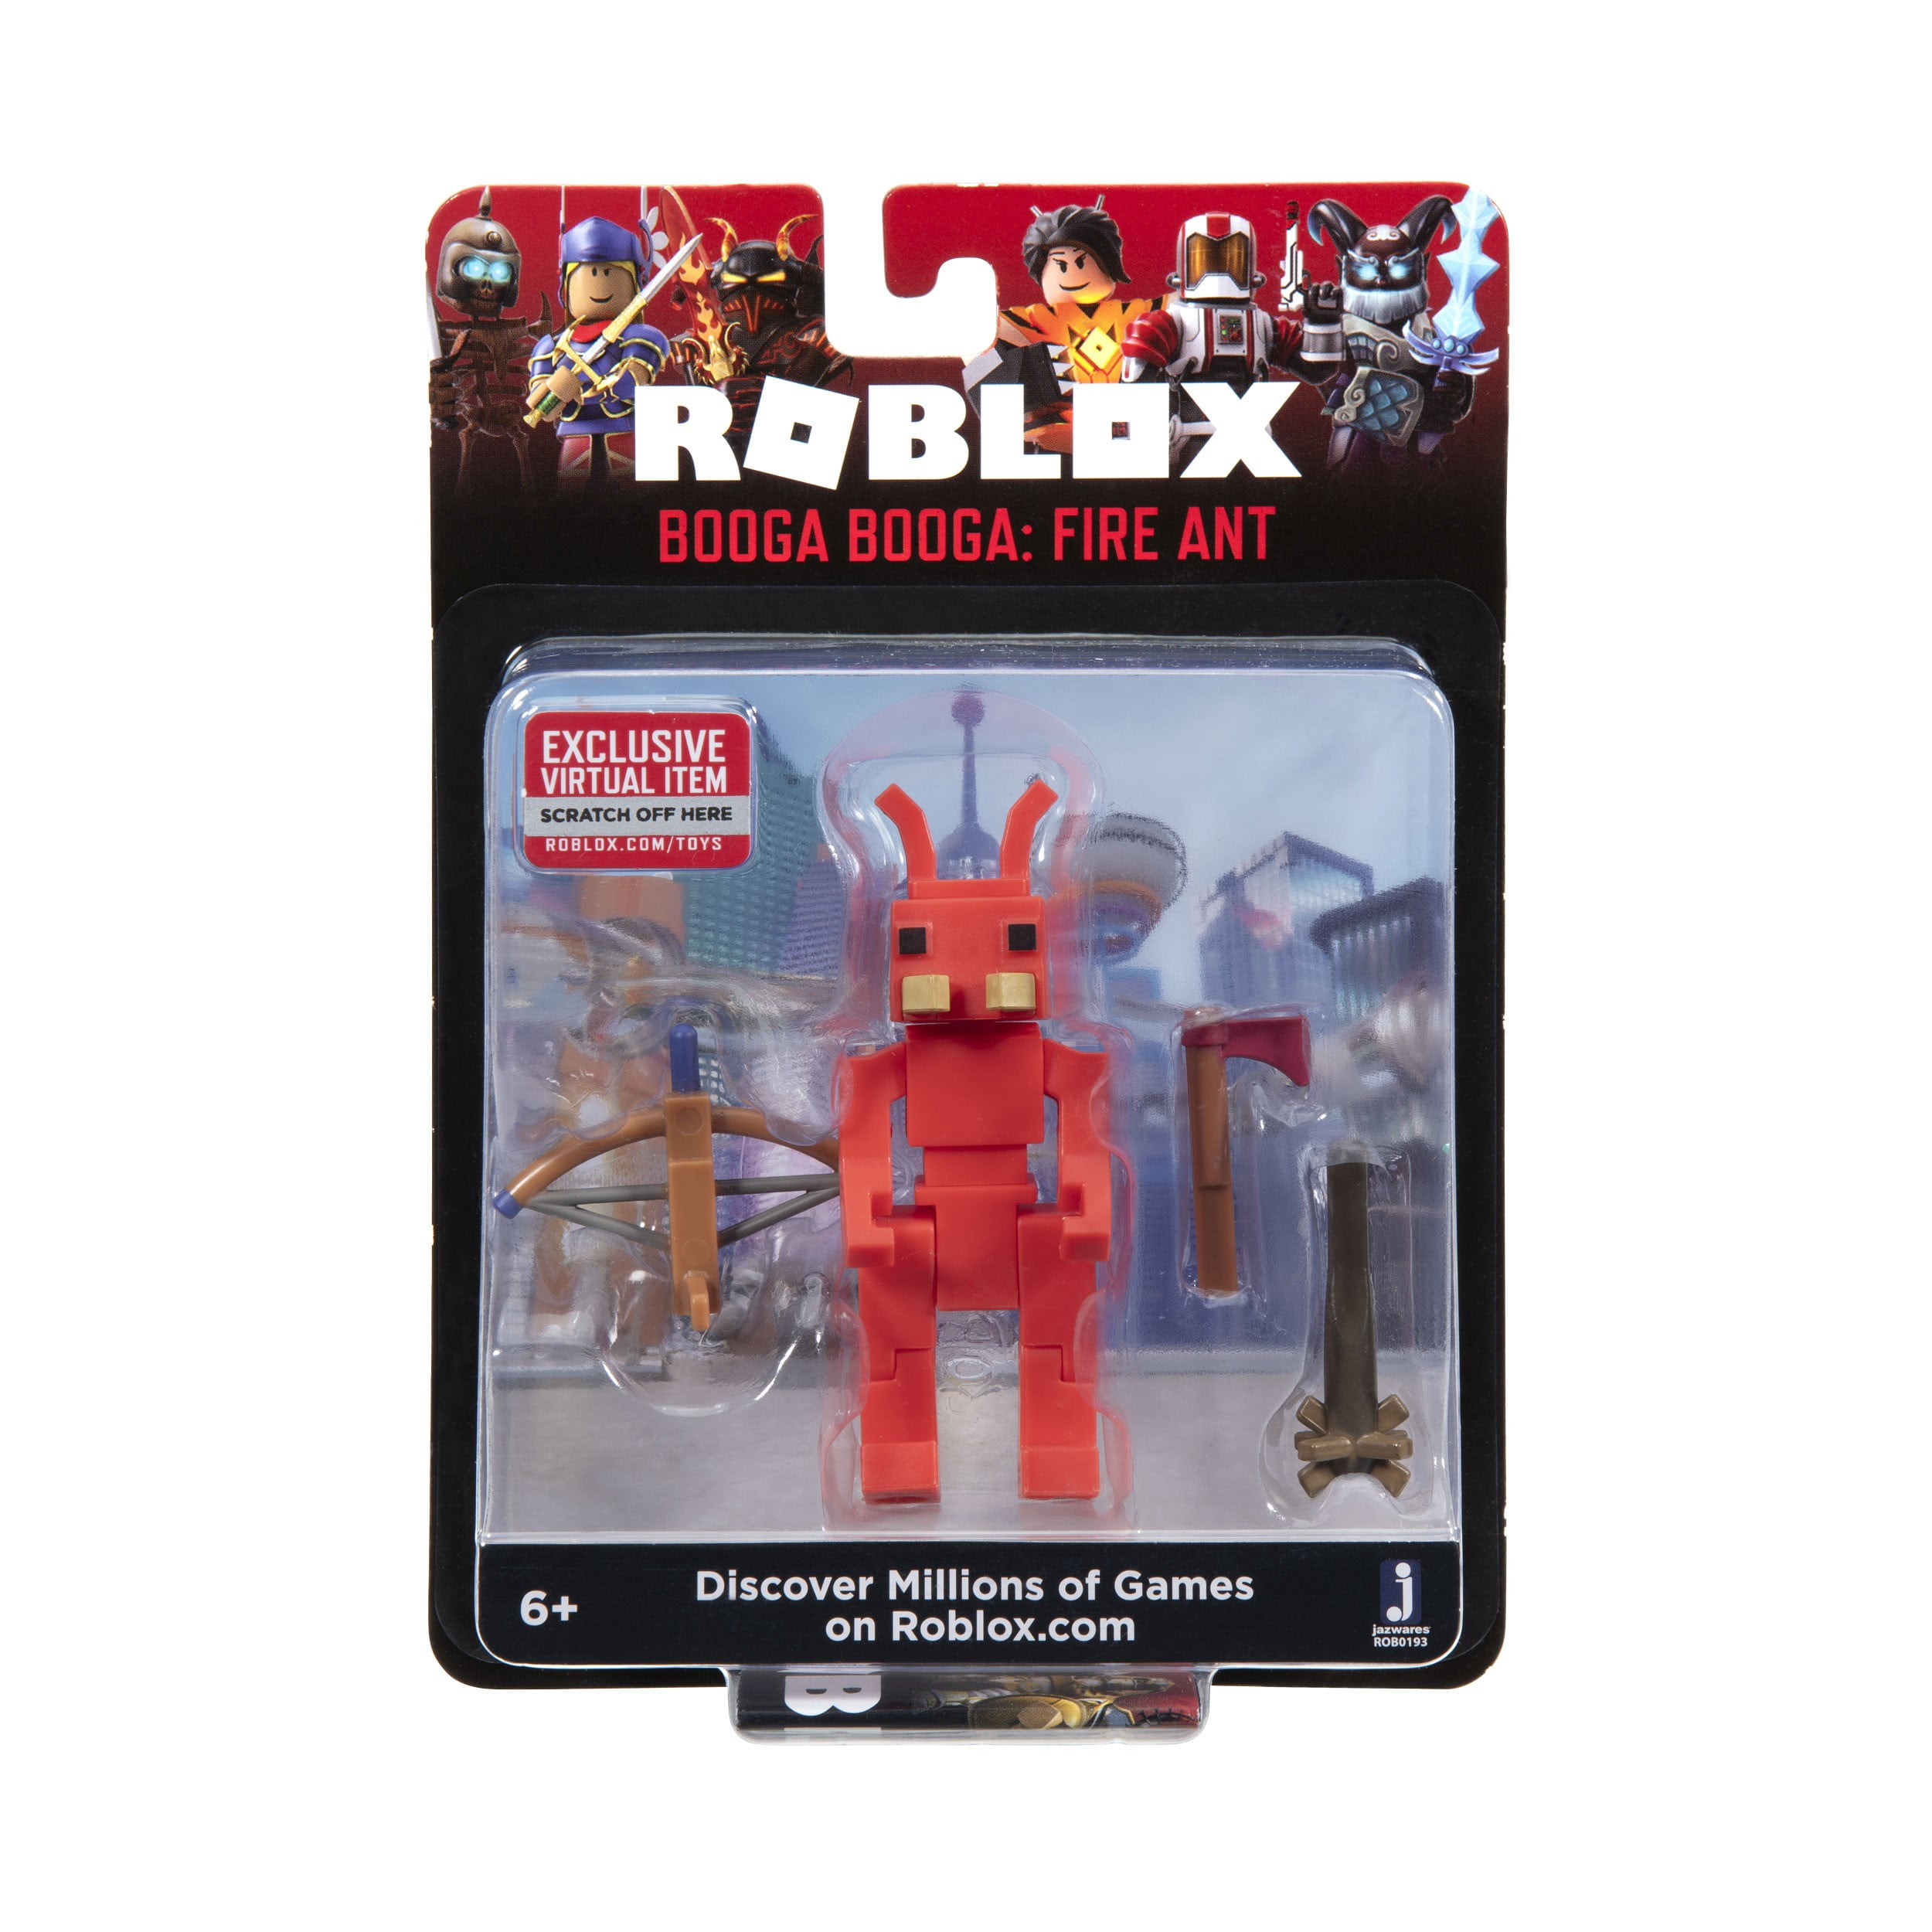 Roblox Booga Booga Fire Ant Action Figure Walmart Com Walmart Com - shopping occupations roblox or spider man action figures